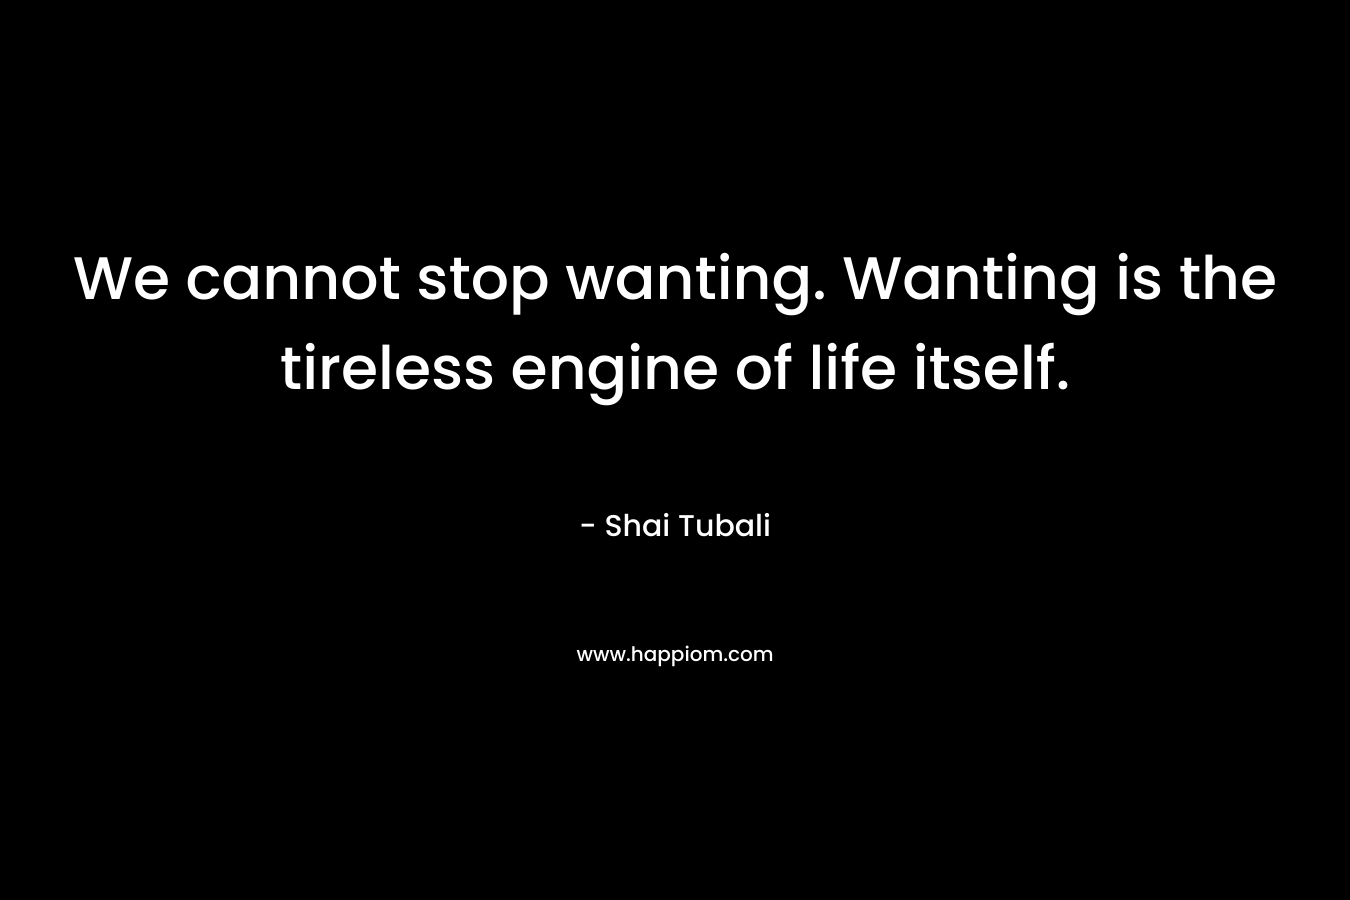 We cannot stop wanting. Wanting is the tireless engine of life itself.